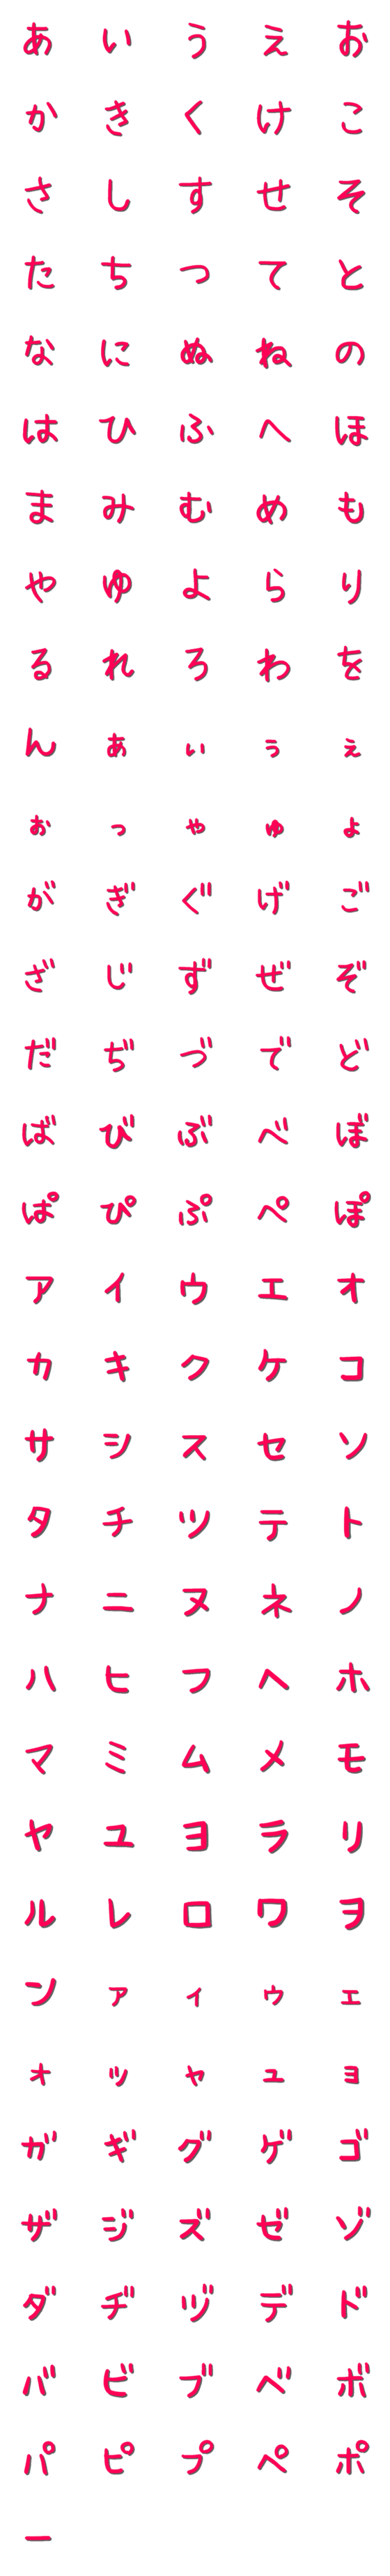 [LINE絵文字]あか文字【影あり】の画像一覧